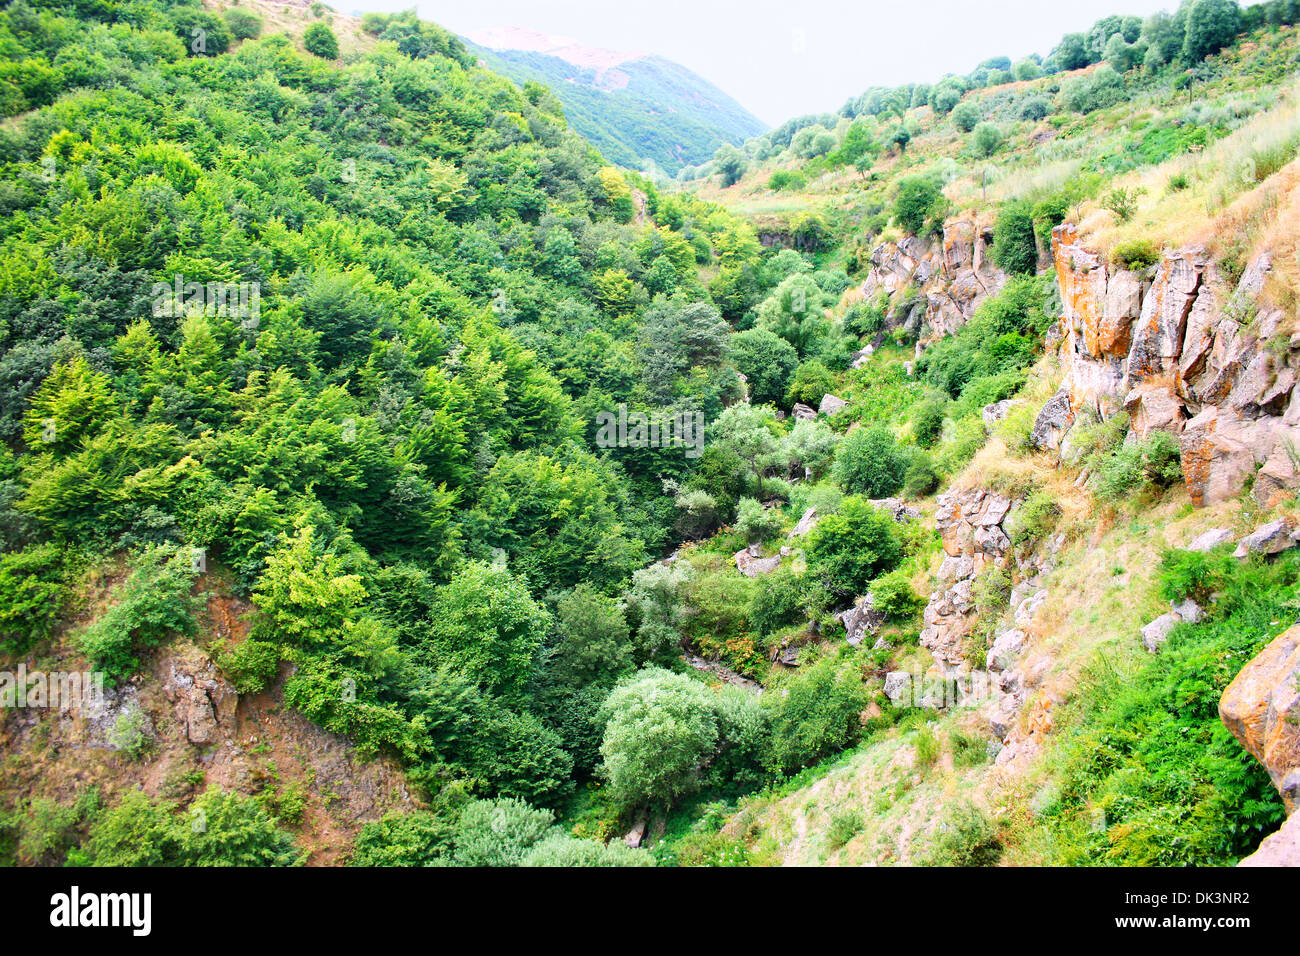 Landscape view from altitude in Armenia. Stock Photo